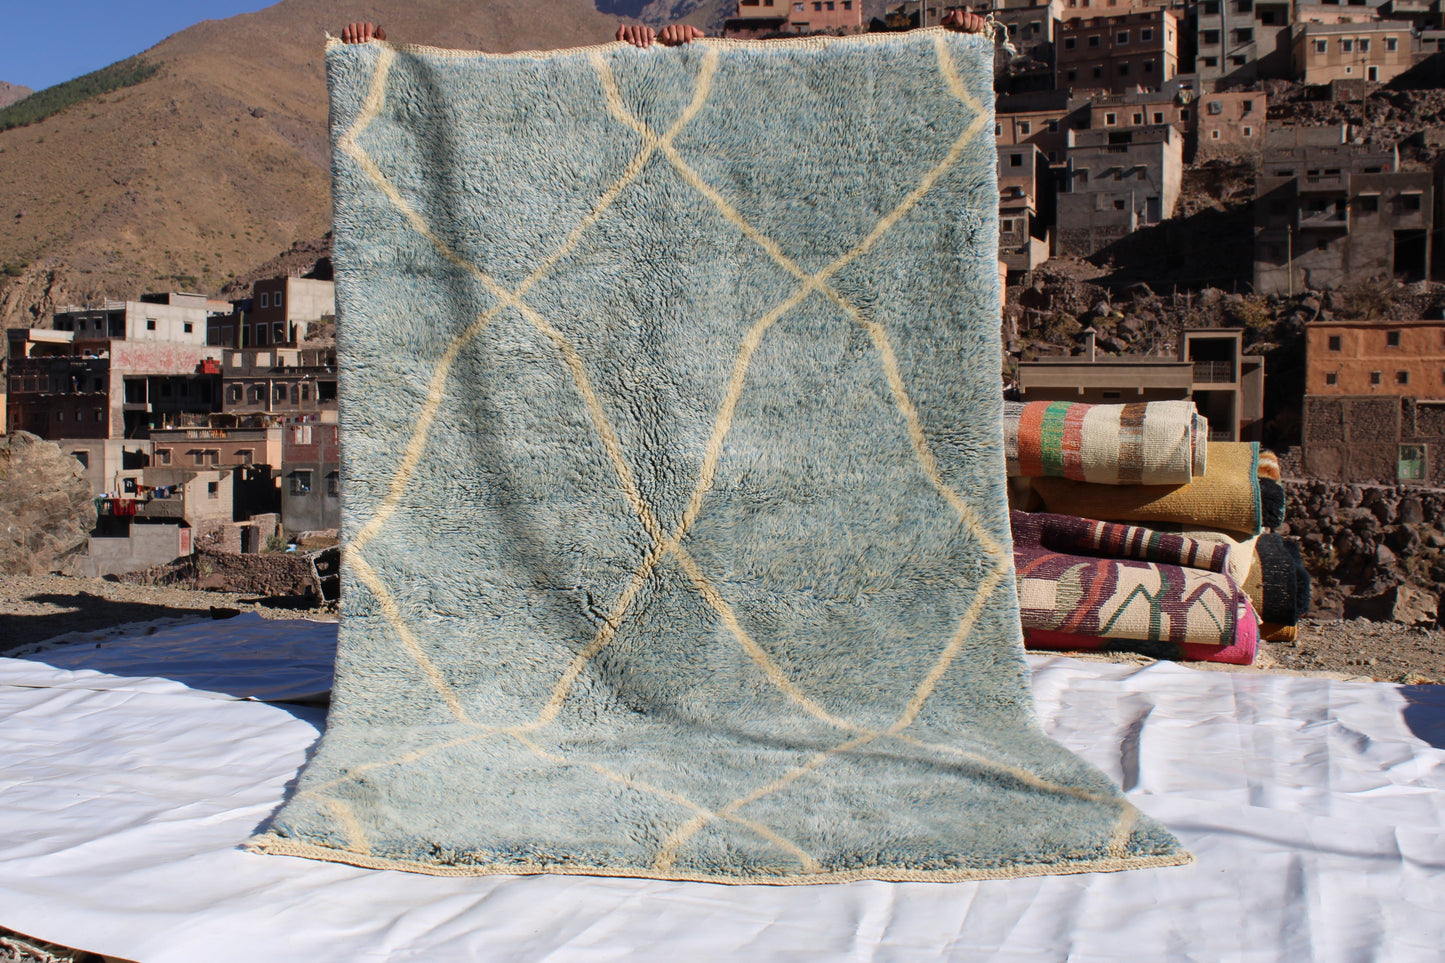 Beni Ourain rugs originate from the Atlas Mountains of Morocco and are characterized by their distinctive, neutral-toned, and geometric designs. These handwoven rugs often feature a plush pile and are made by the Berber tribes,  size is 260x160 cm